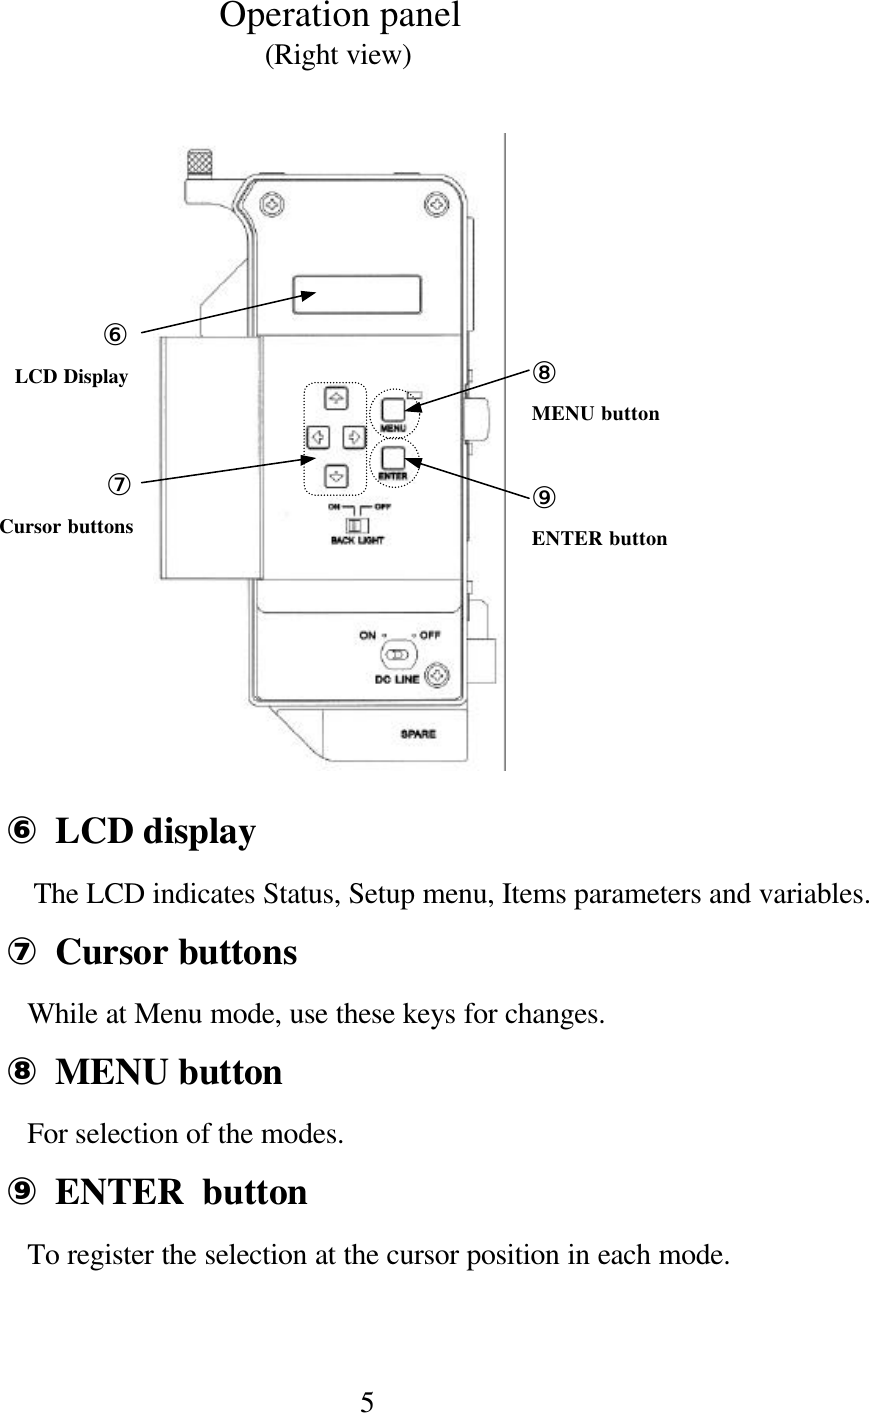 5⑥LCD display  The LCD indicates Status, Setup menu, Items parameters and variables.⑦Cursor buttons While at Menu mode, use these keys for changes.⑧MENU button  For selection of the modes.⑨ENTER  button To register the selection at the cursor position in each mode.⑧MENU button⑦Cursor buttonsOperation panel(Right view)⑥LCD Display⑨ENTER button